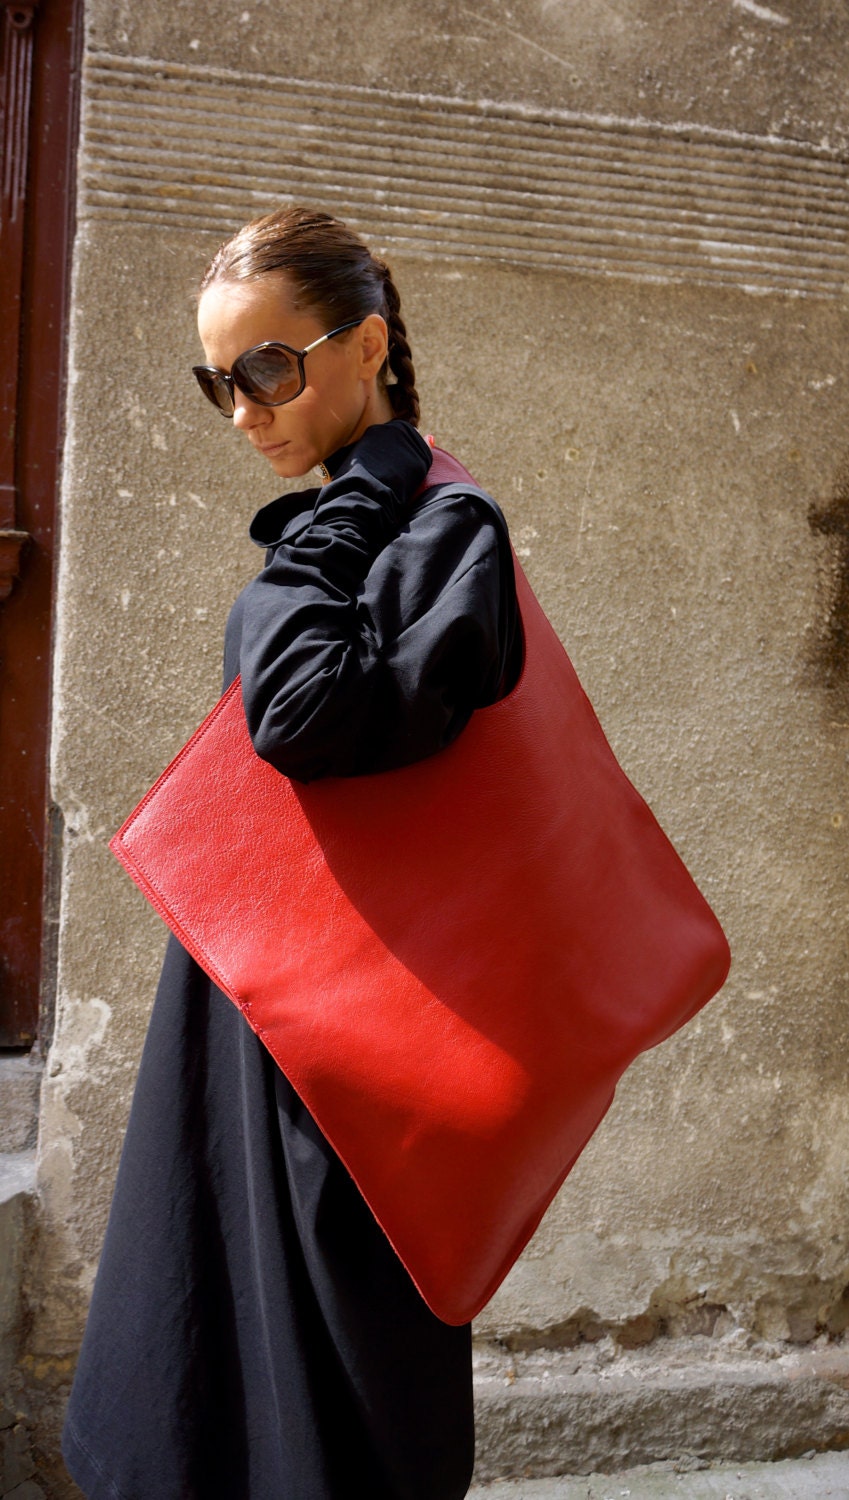 NEW Genuine Leather Red Bag / High Quality Tote by Aakasha